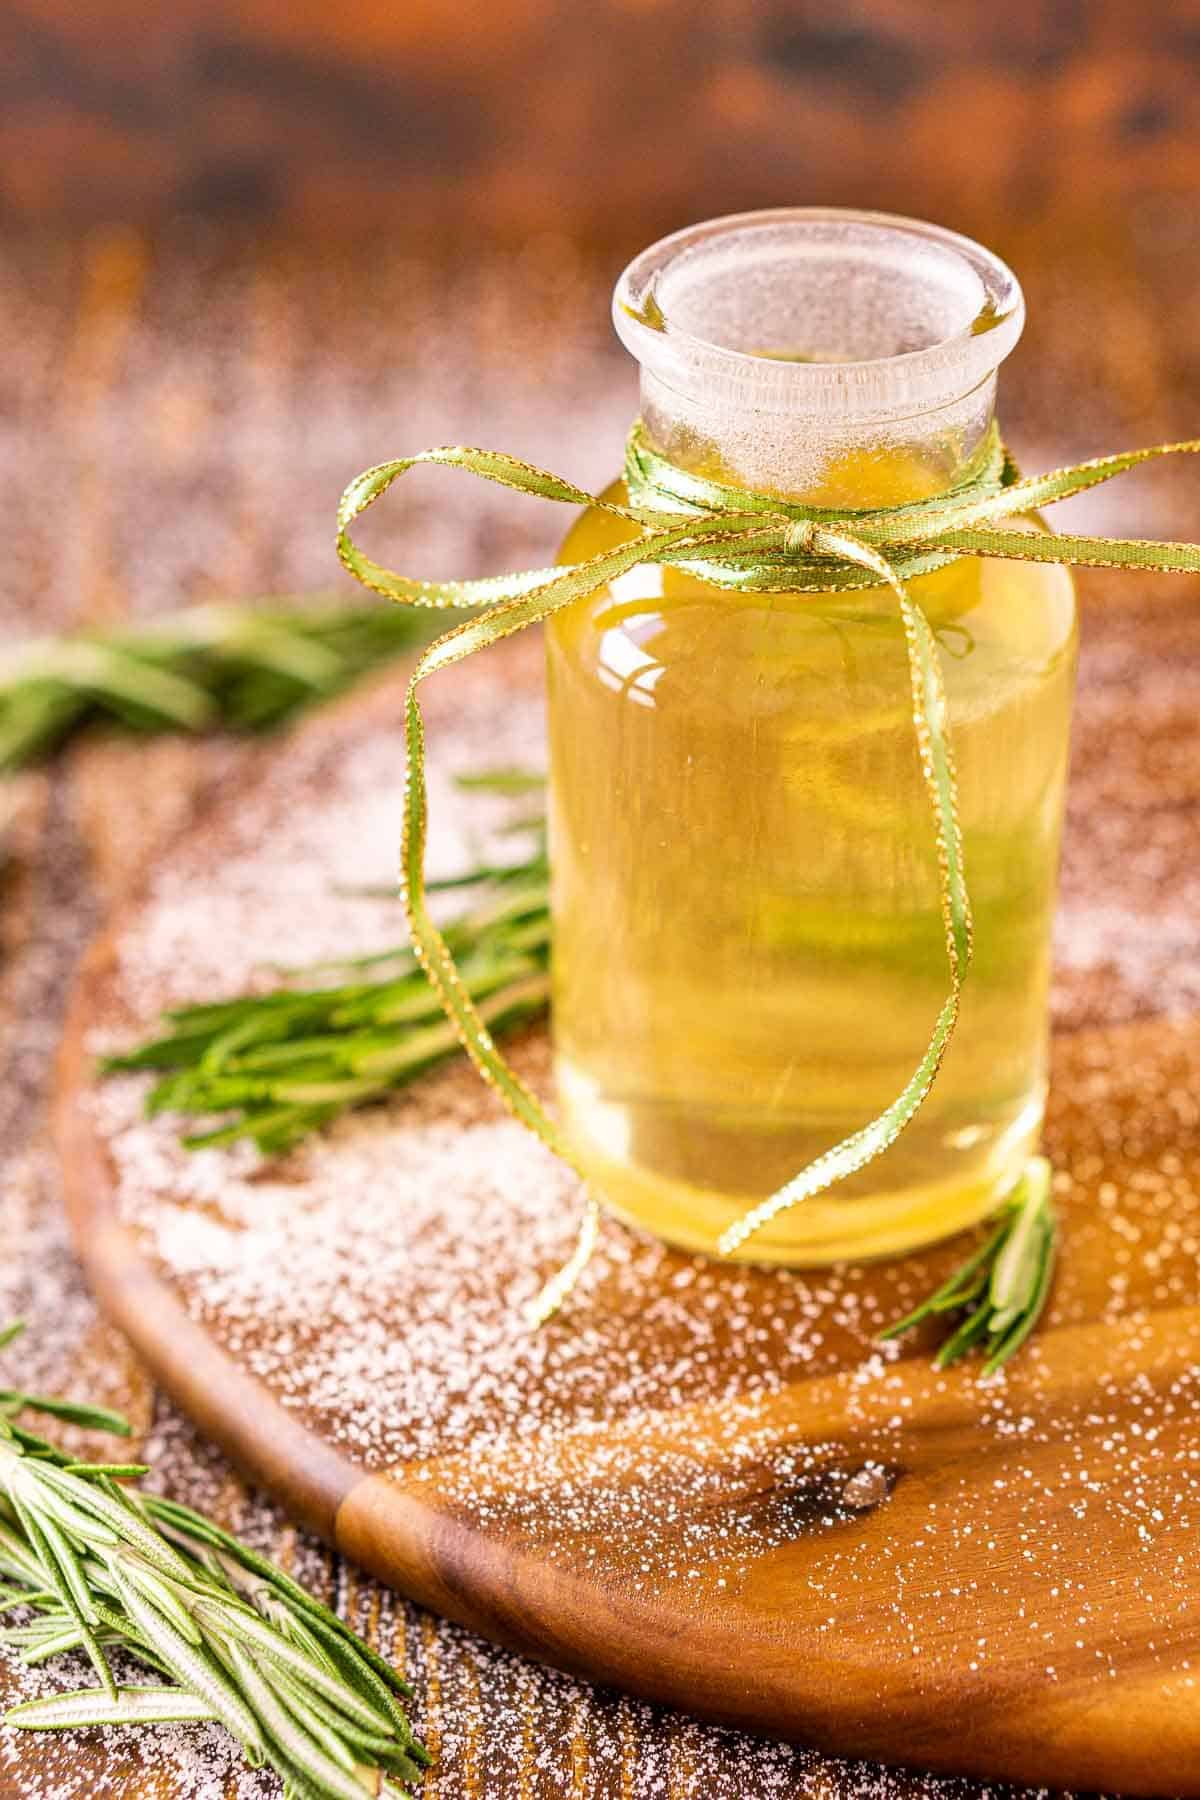 A bottle of the rosemary simple syrup against a wooden background on a serving tray with sugar sprinkled around it.